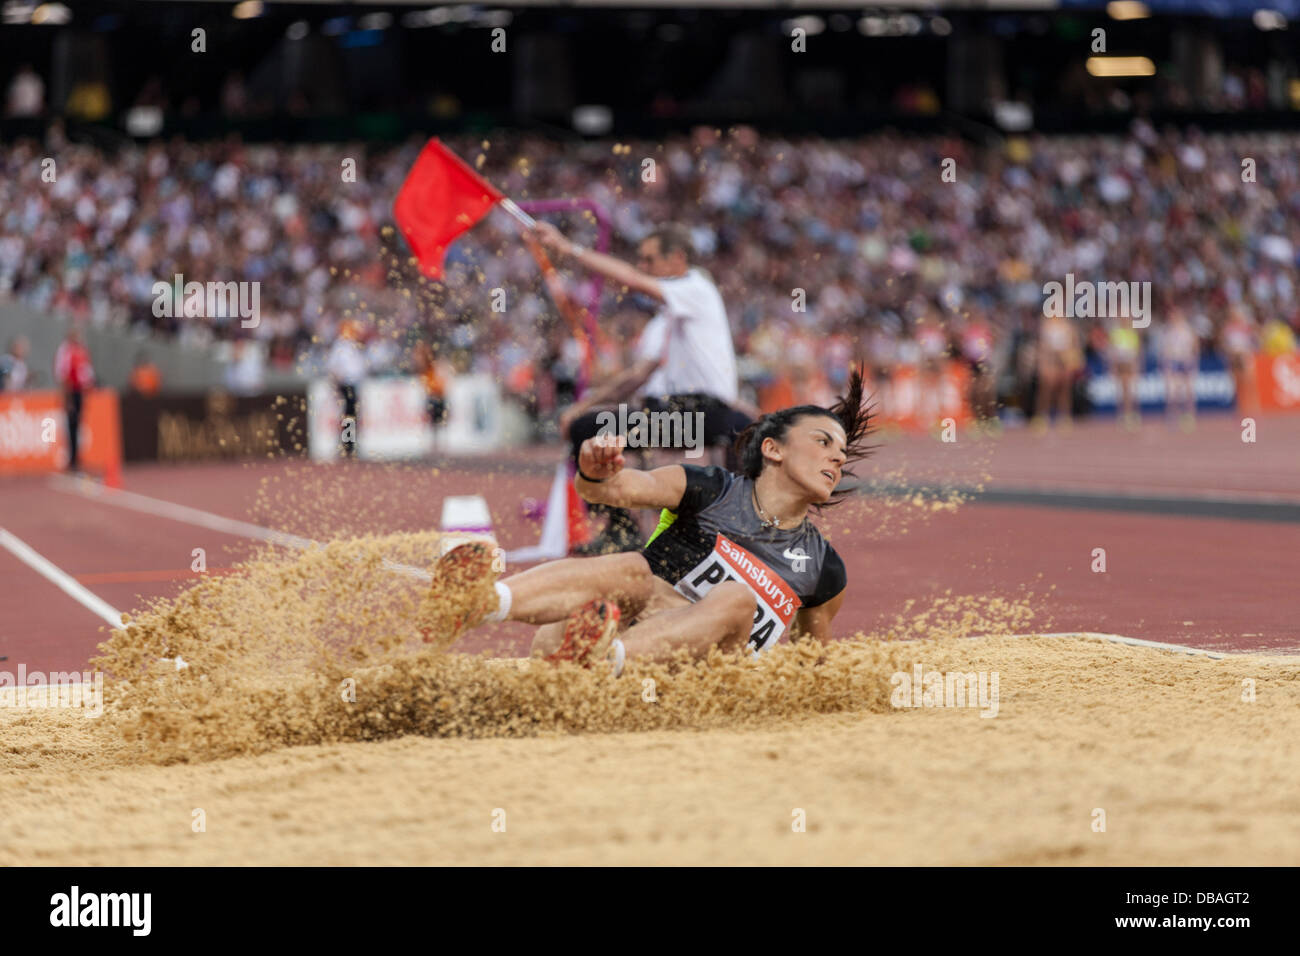 London, UK. 26th July, Athanasia Perra in action at the womens triple jump event, red flagged, Anniversary Games British Athletics, London. 2013. Photo: Credit: Rebecca Andrews/Alamy Live News Stock Photo